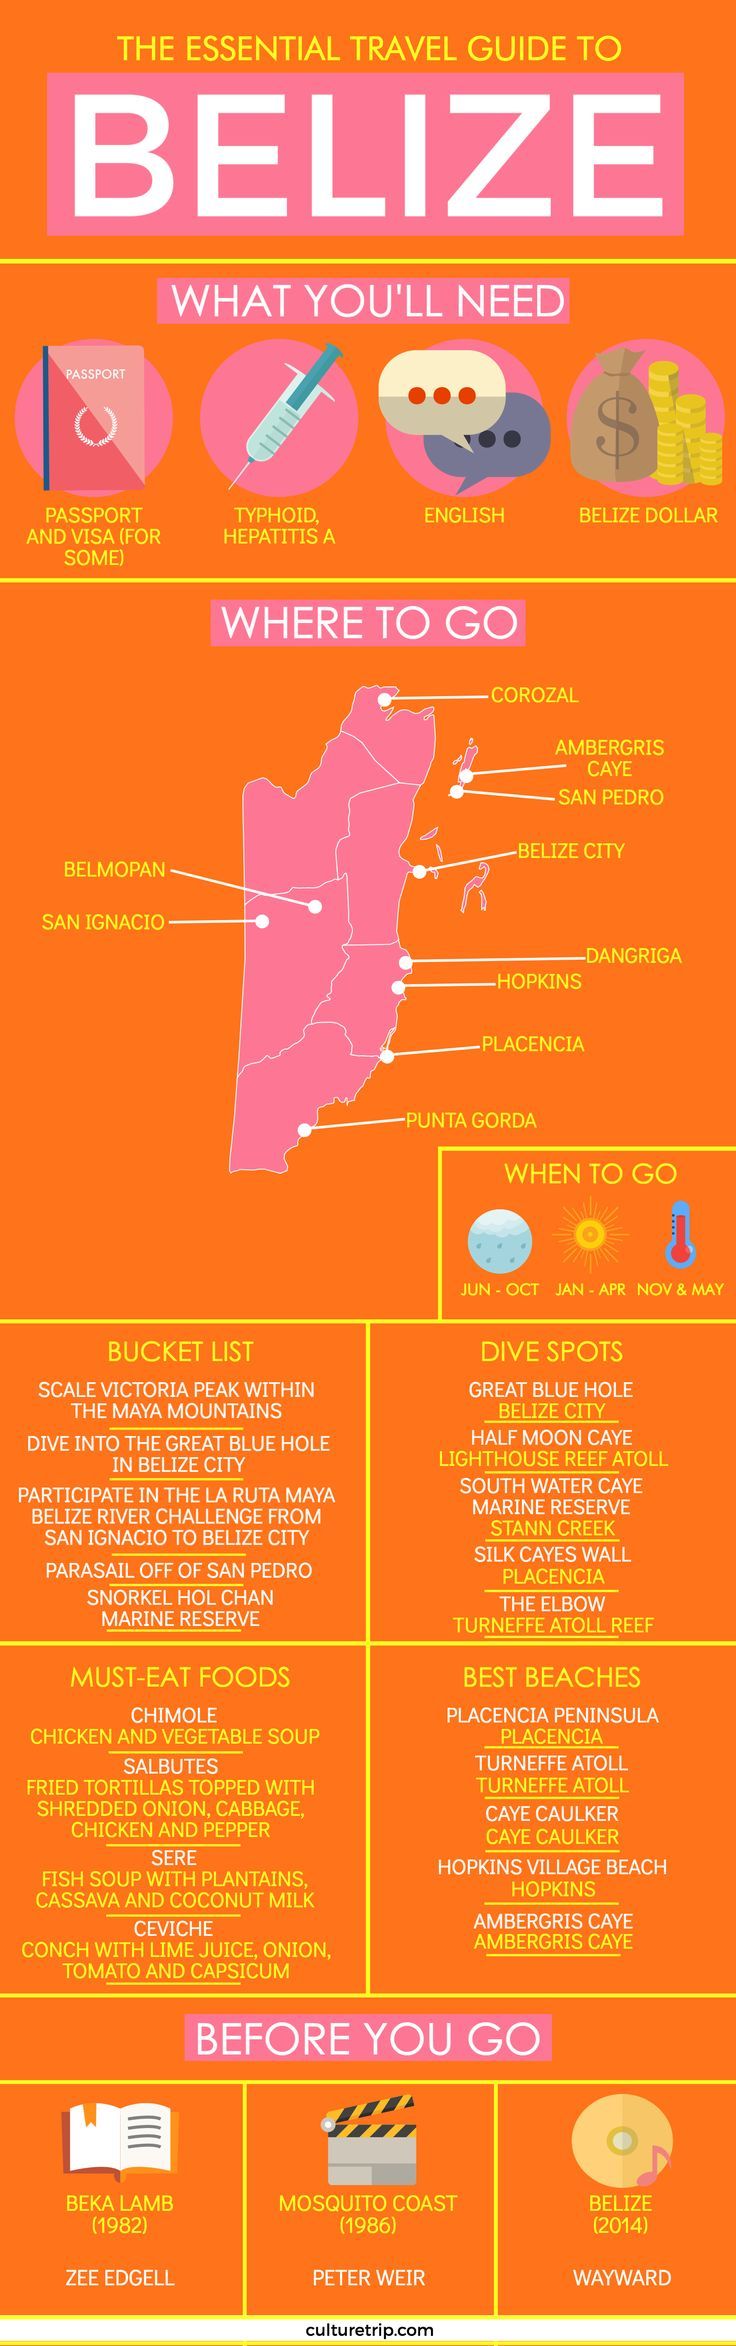 The Essential Travel Guide to Belize (Infographic)